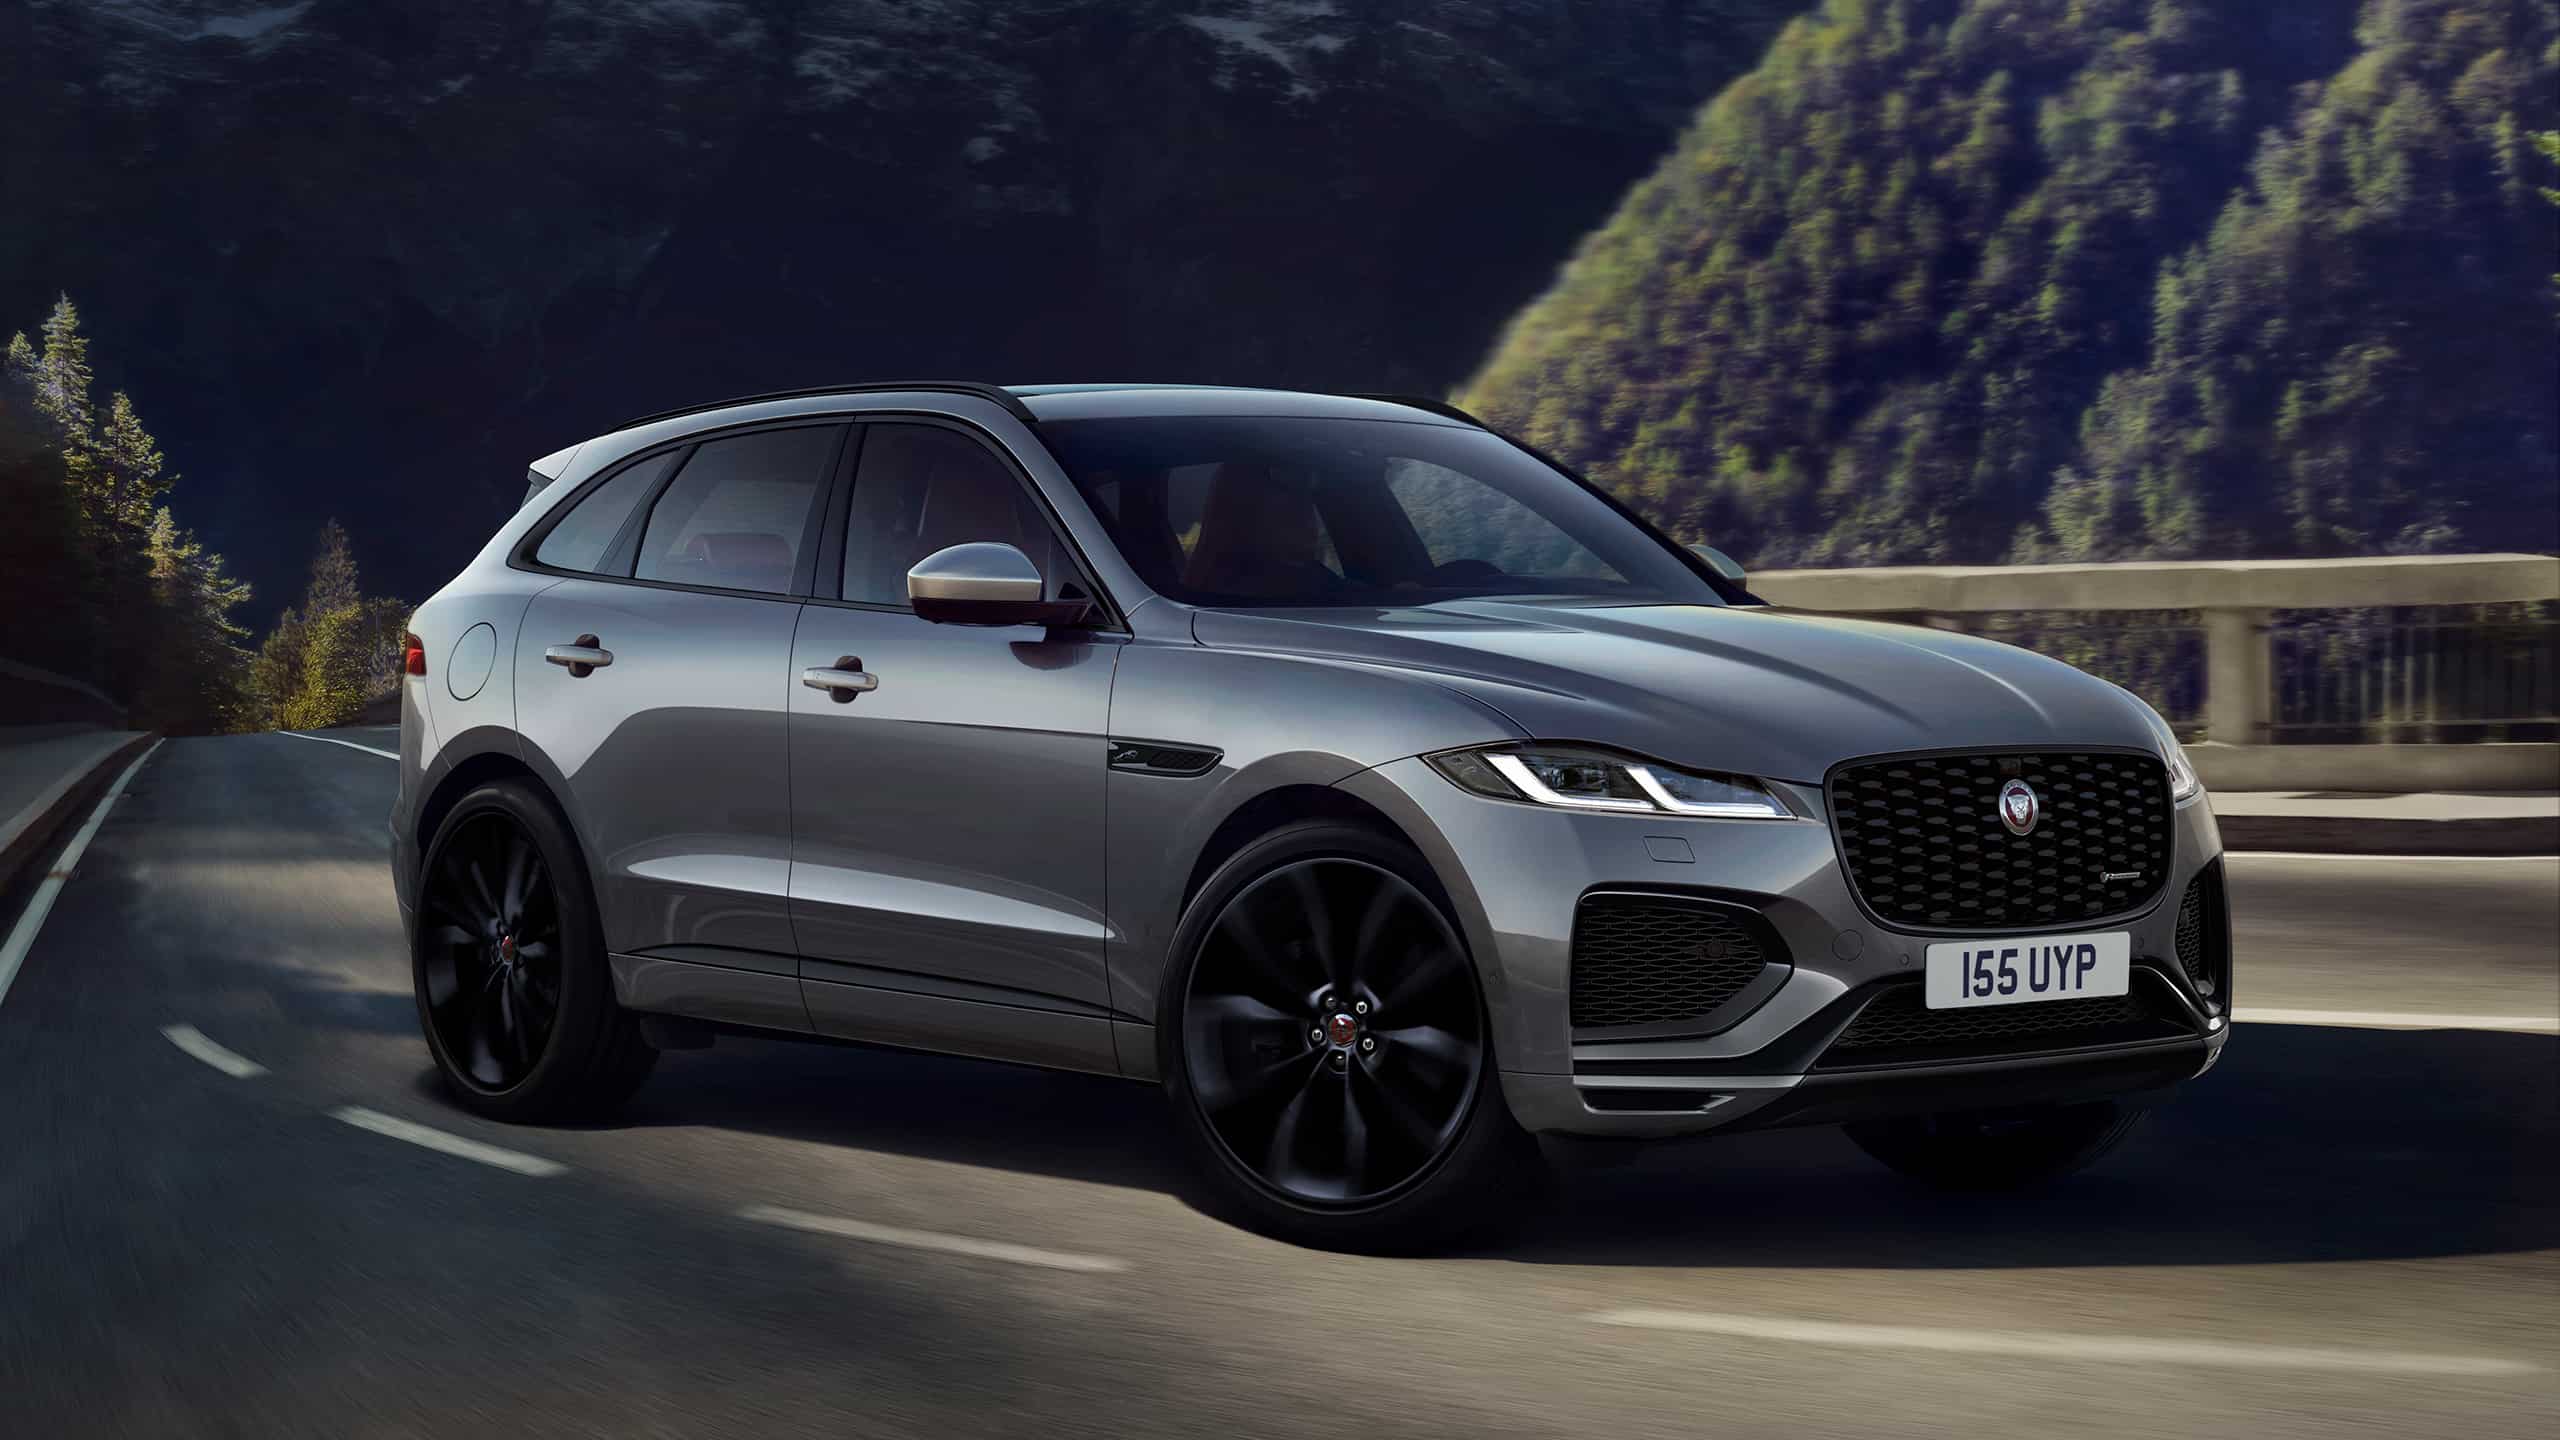 Jaguar F-Pace Running on a Hilly Road